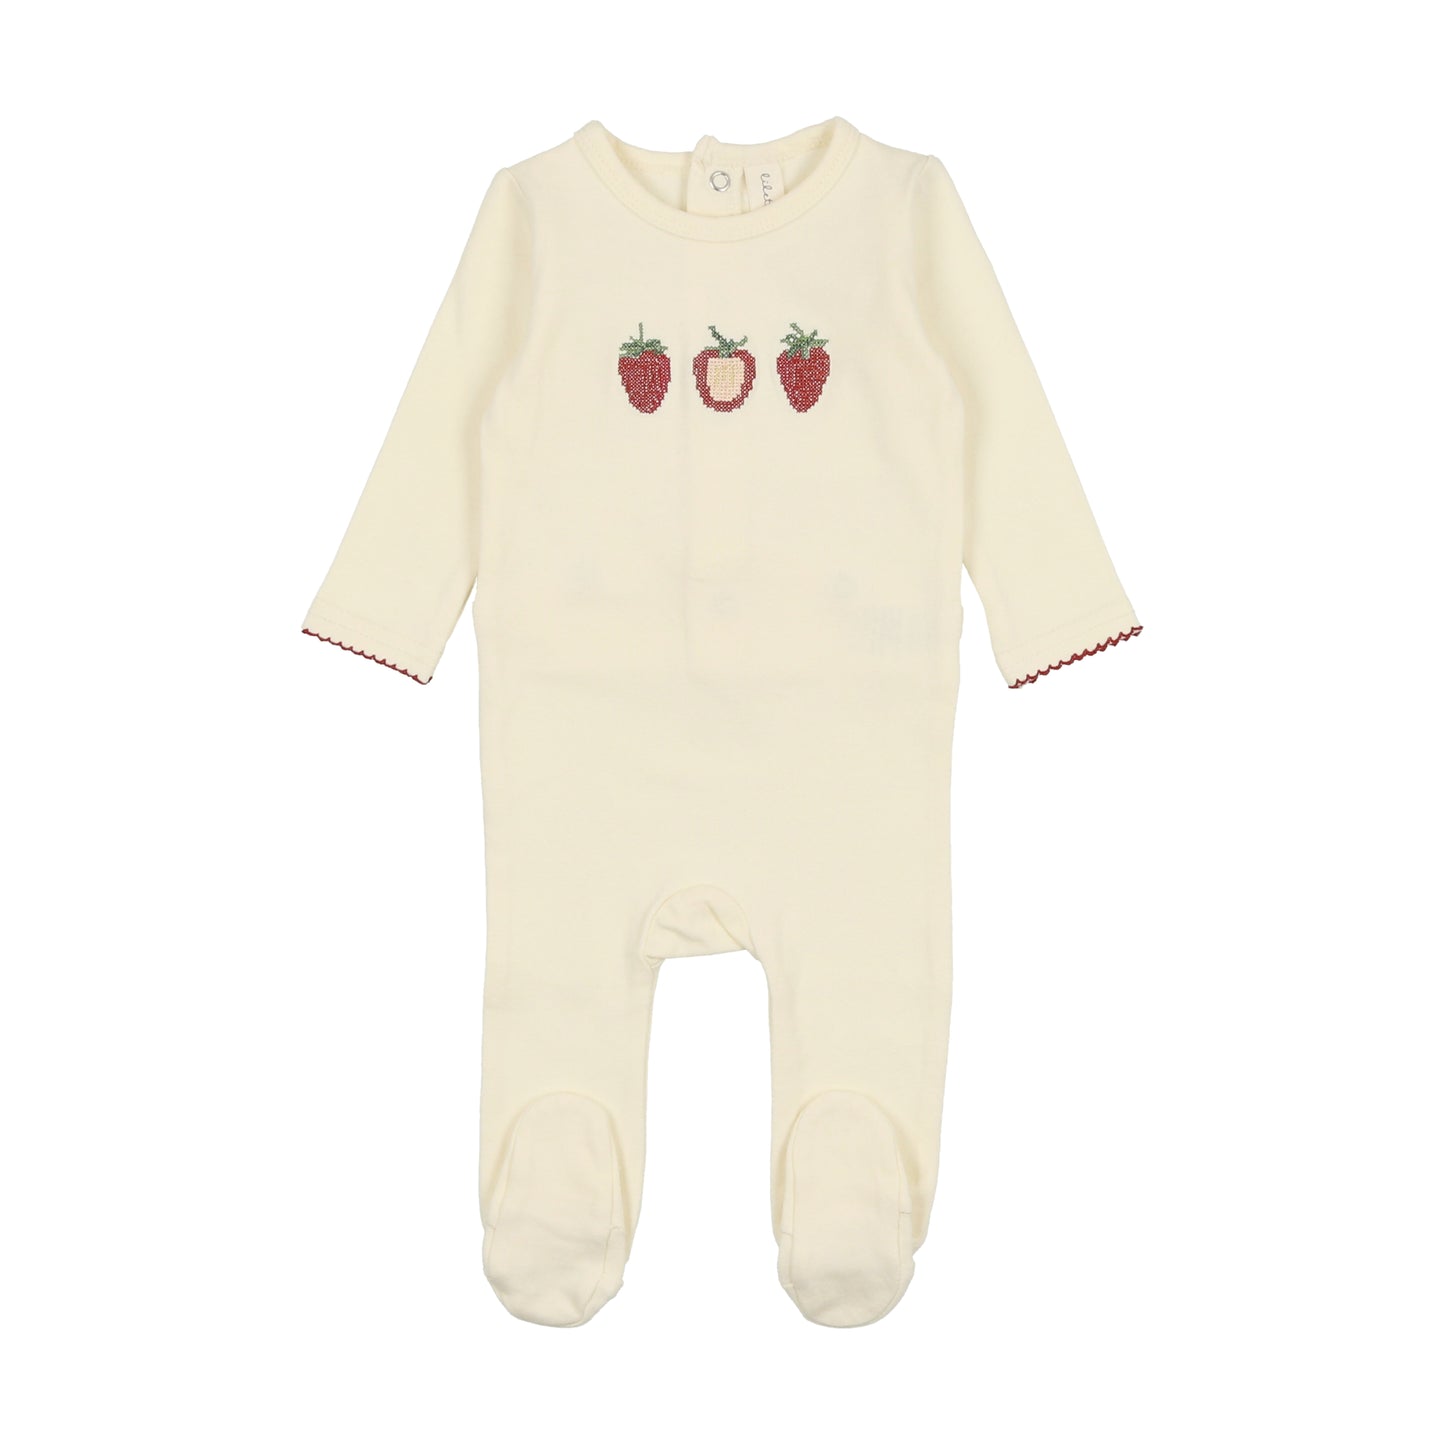 LILETTE IVORY/STRAWBERRY EMBROIDERED FRUIT FOOTIE